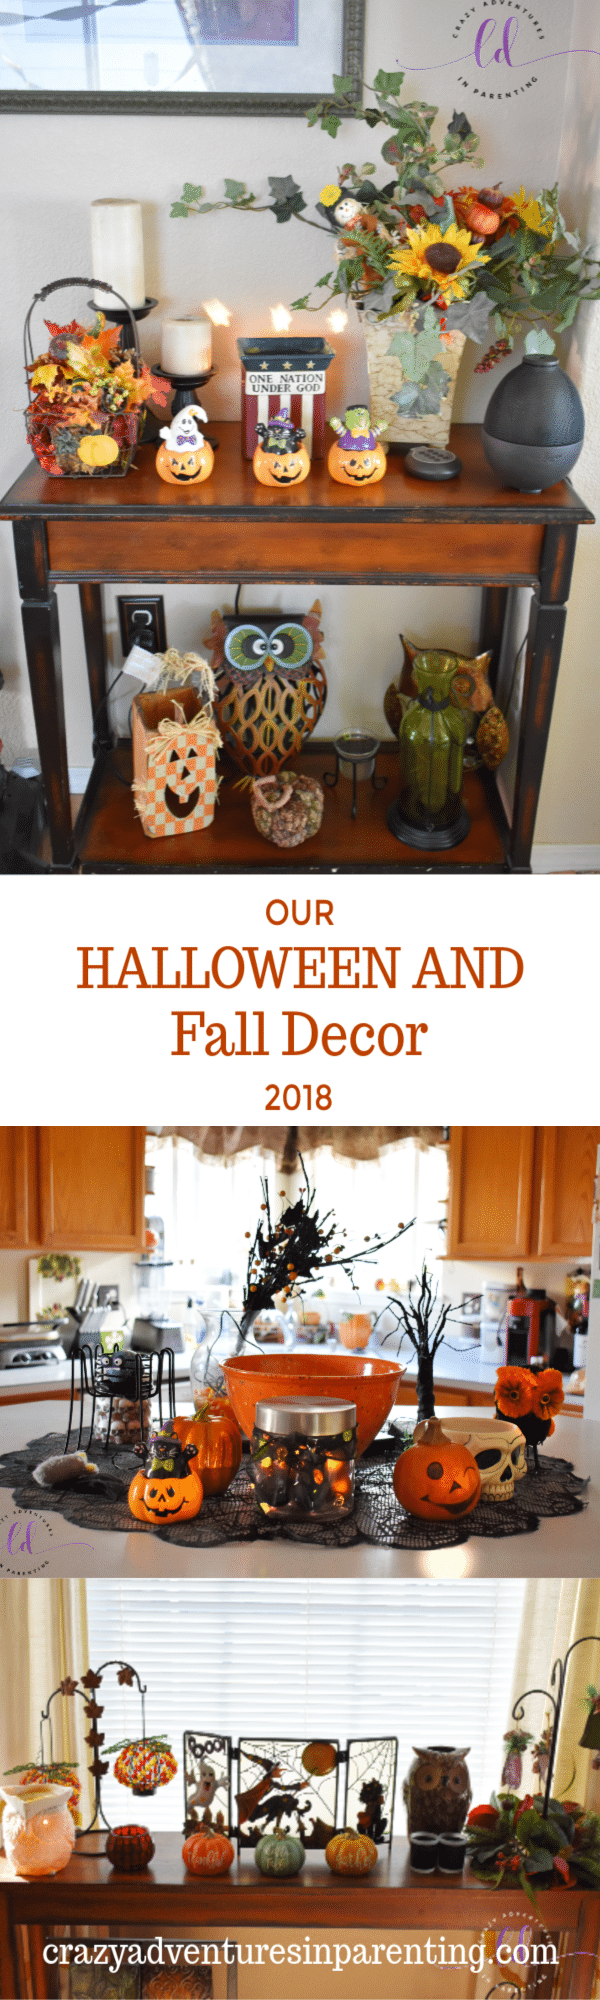 Our Halloween and Fall Decor 2018